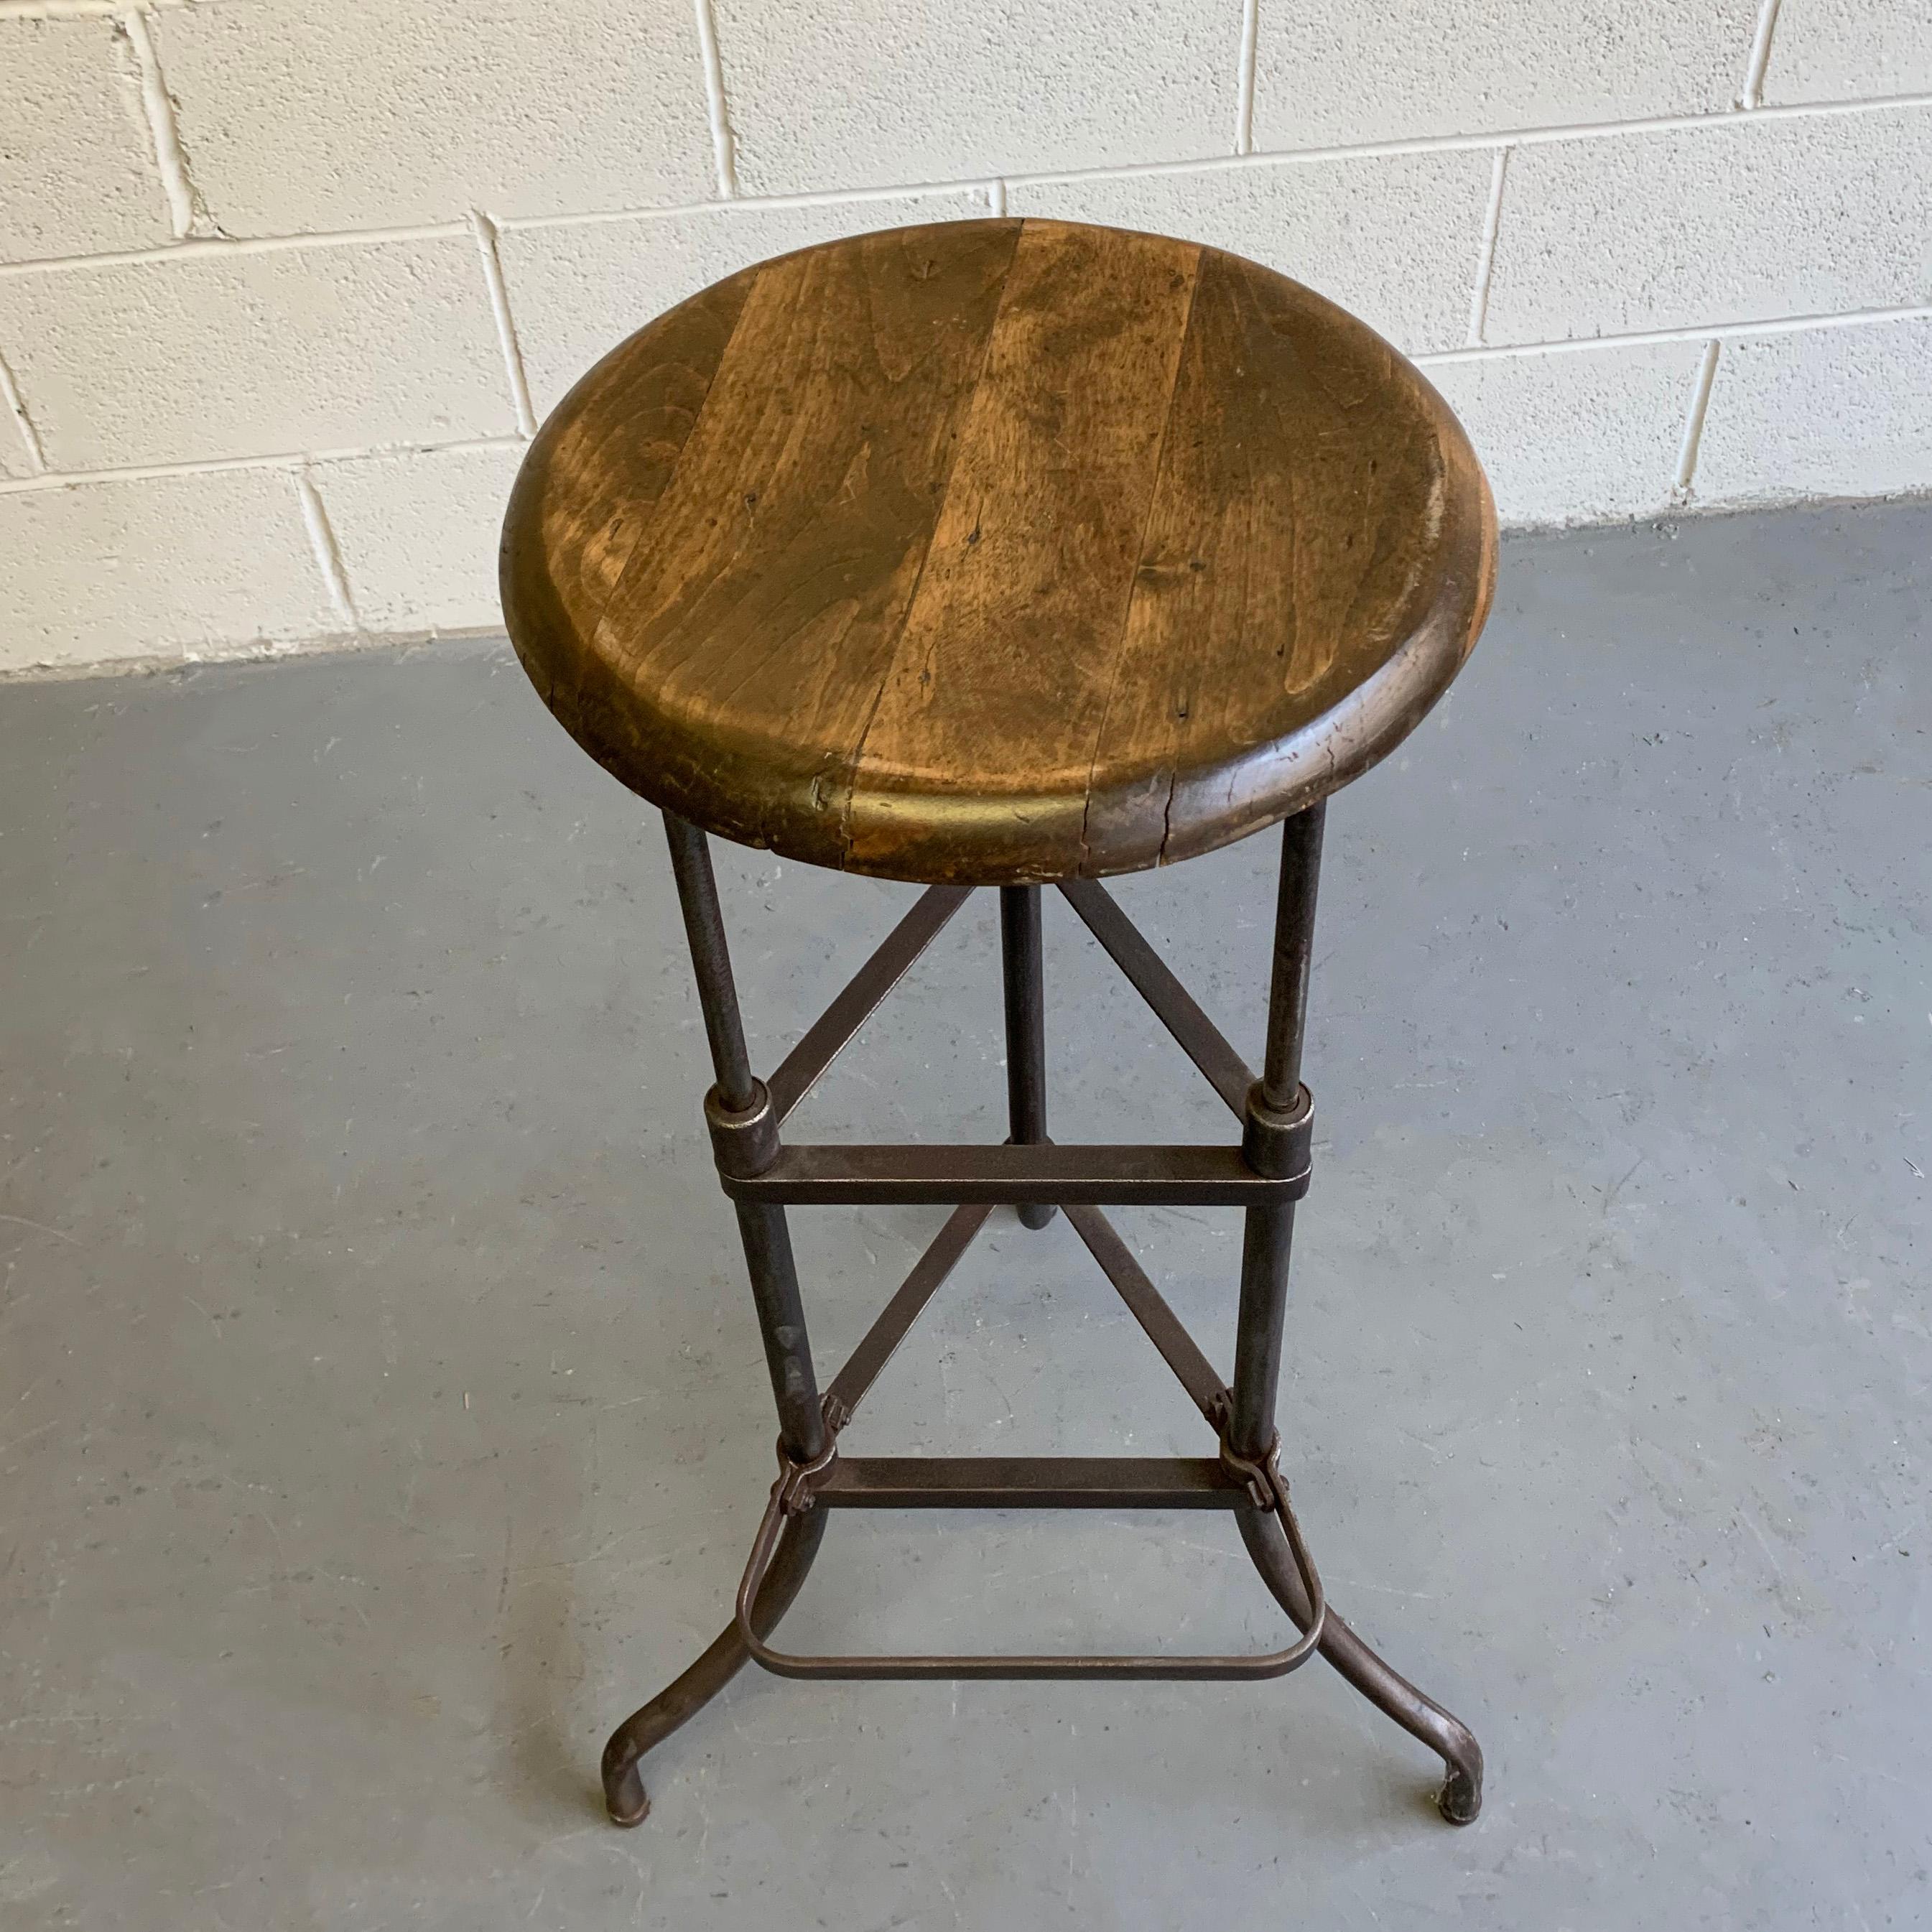 Maple Early 20th Century Industrial Drafting Stool with Footrest